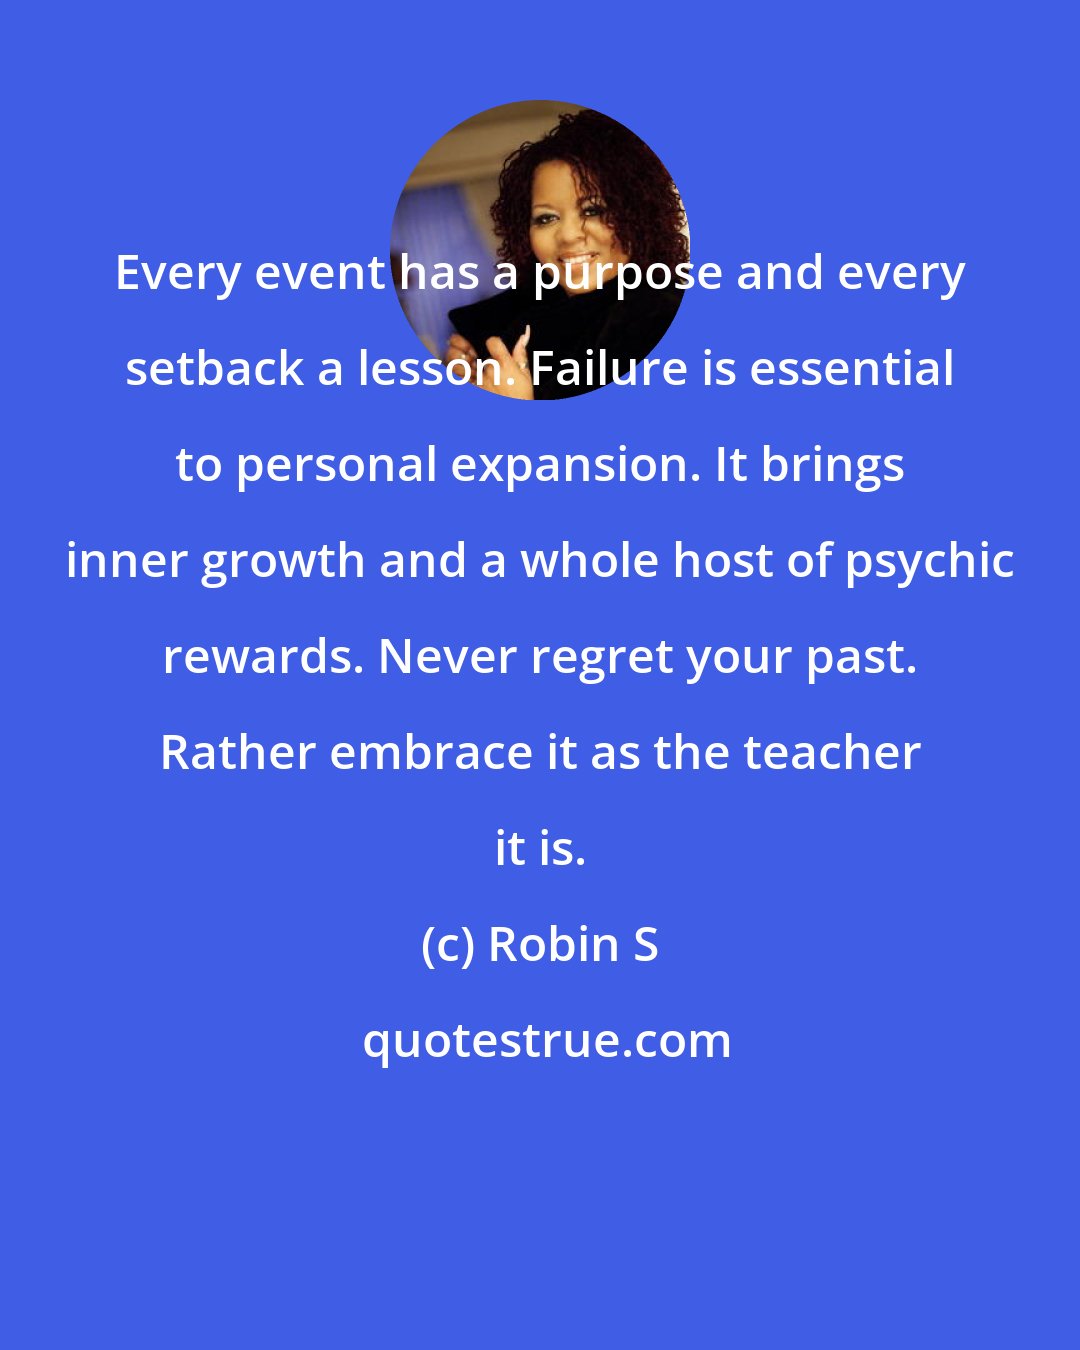 Robin S: Every event has a purpose and every setback a lesson. Failure is essential to personal expansion. It brings inner growth and a whole host of psychic rewards. Never regret your past. Rather embrace it as the teacher it is.